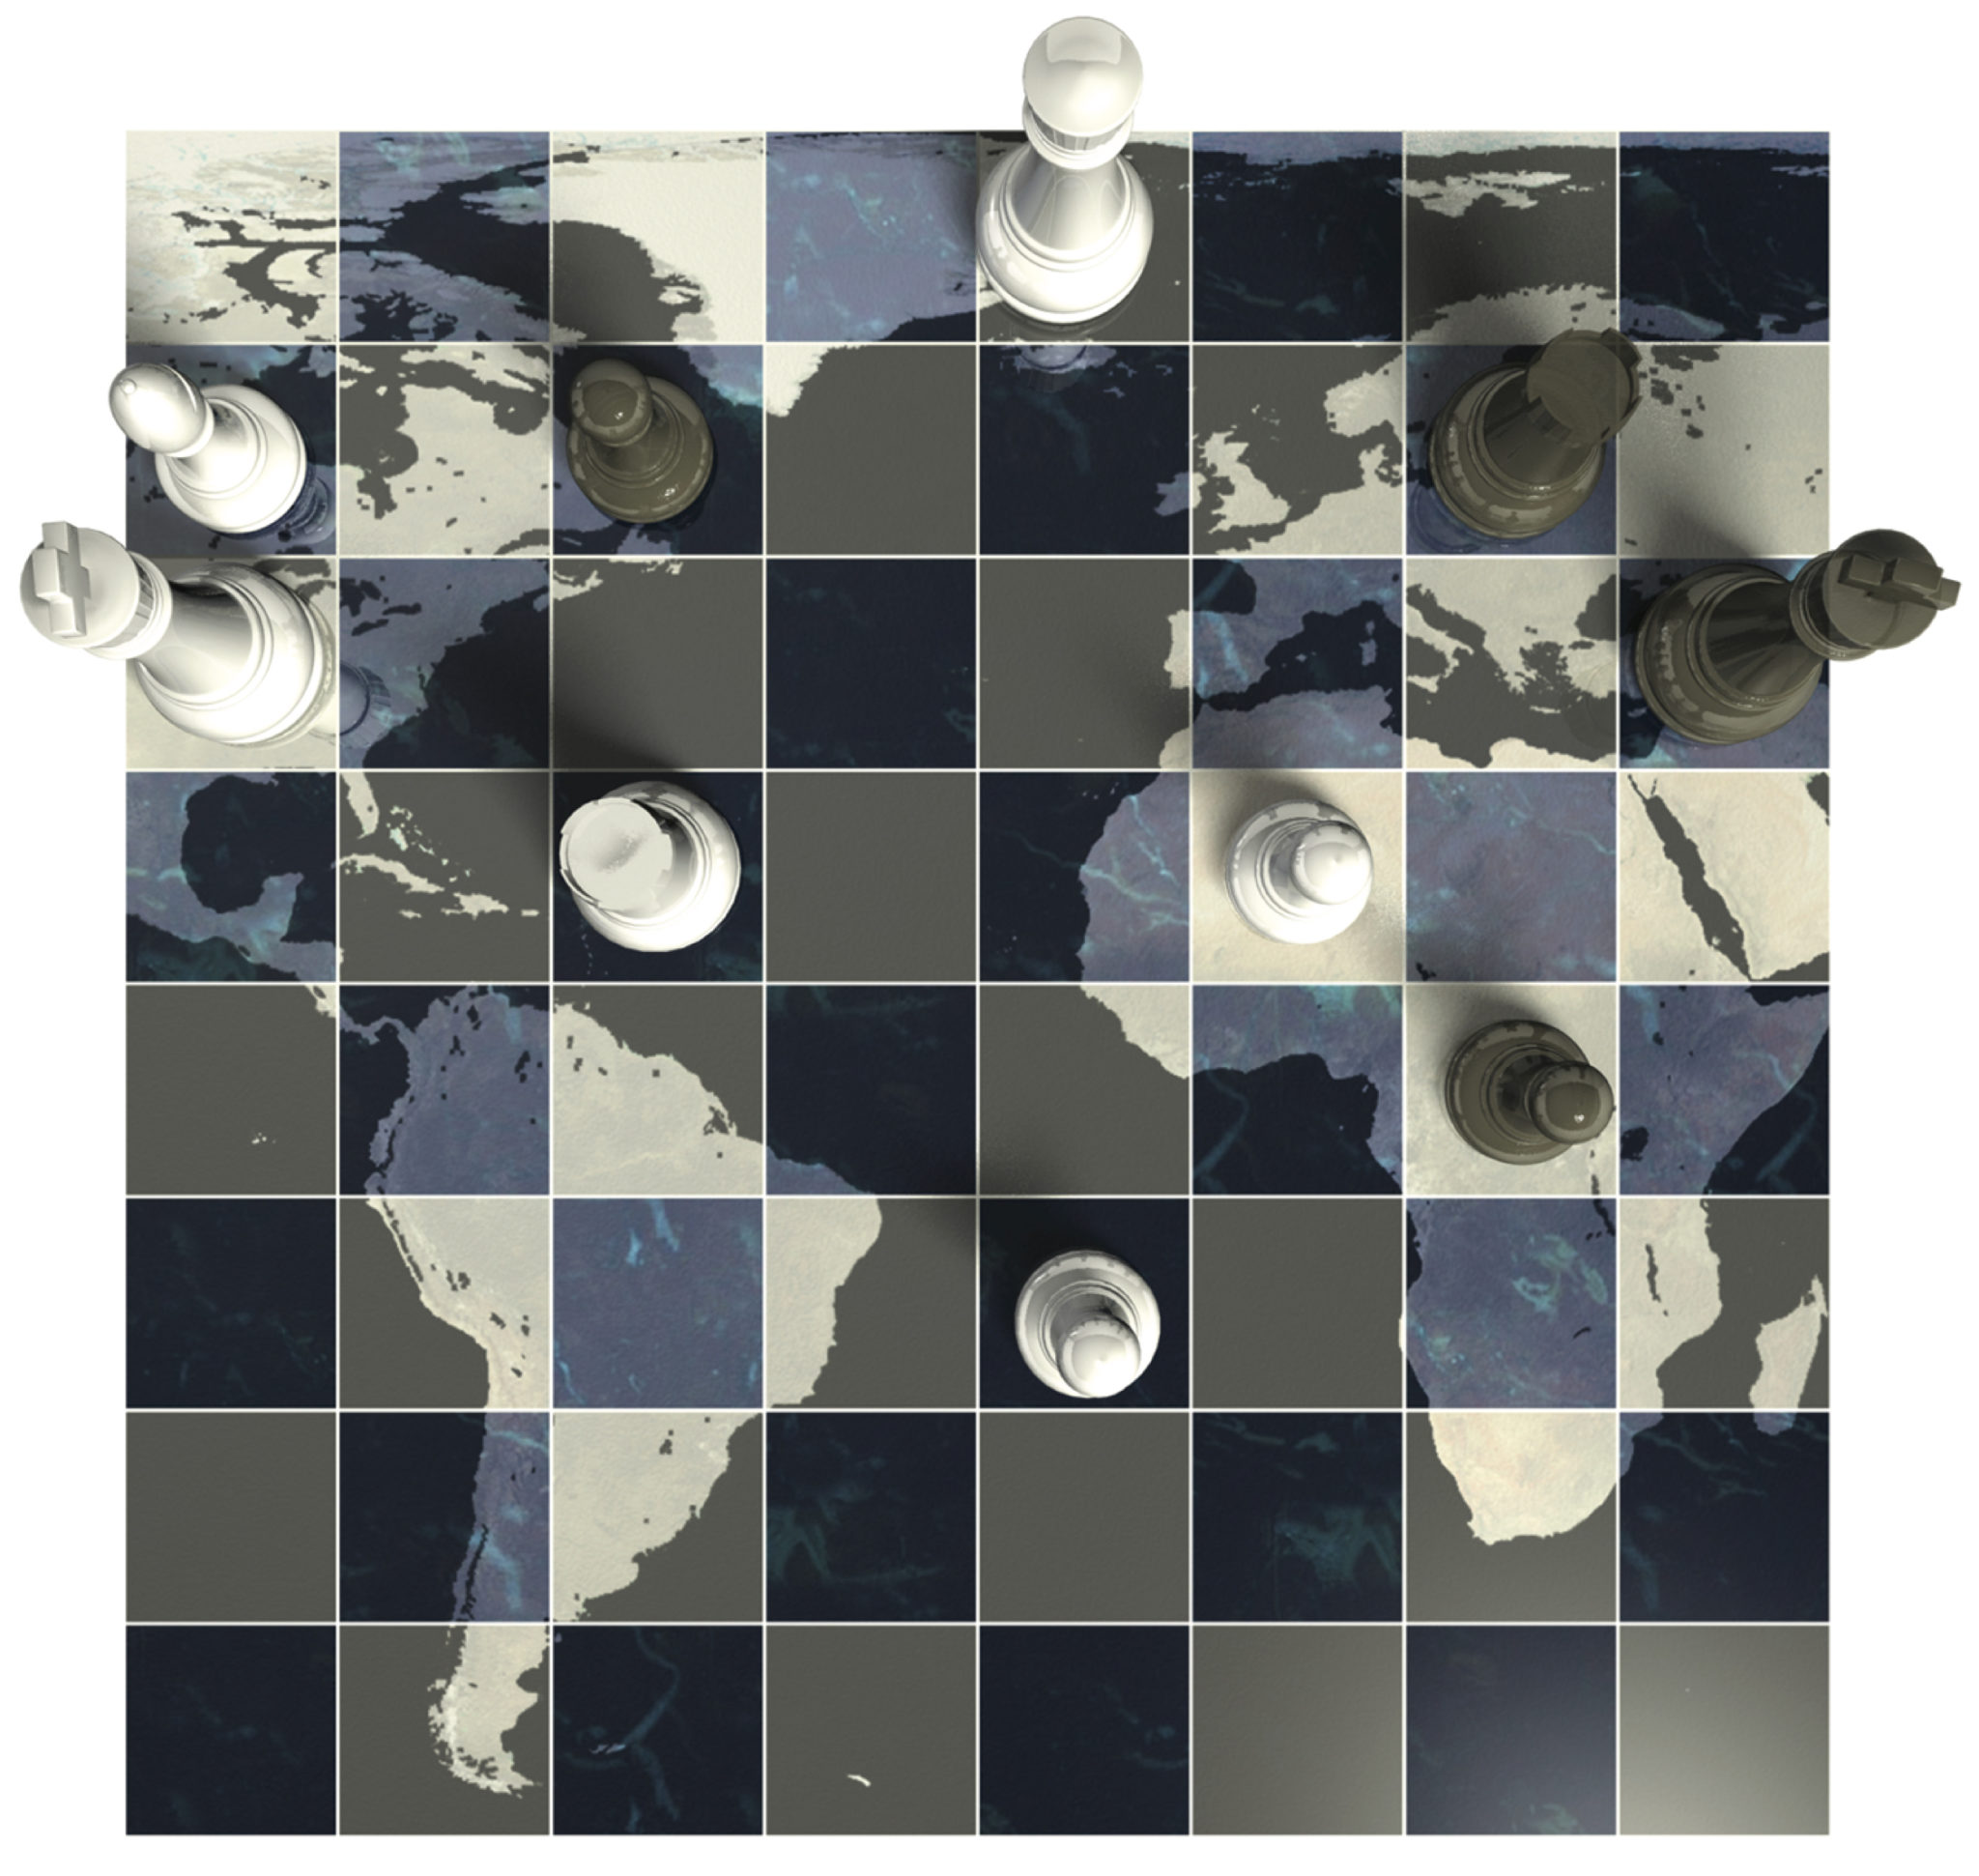 Stock image of chess piece on a globe-themed board